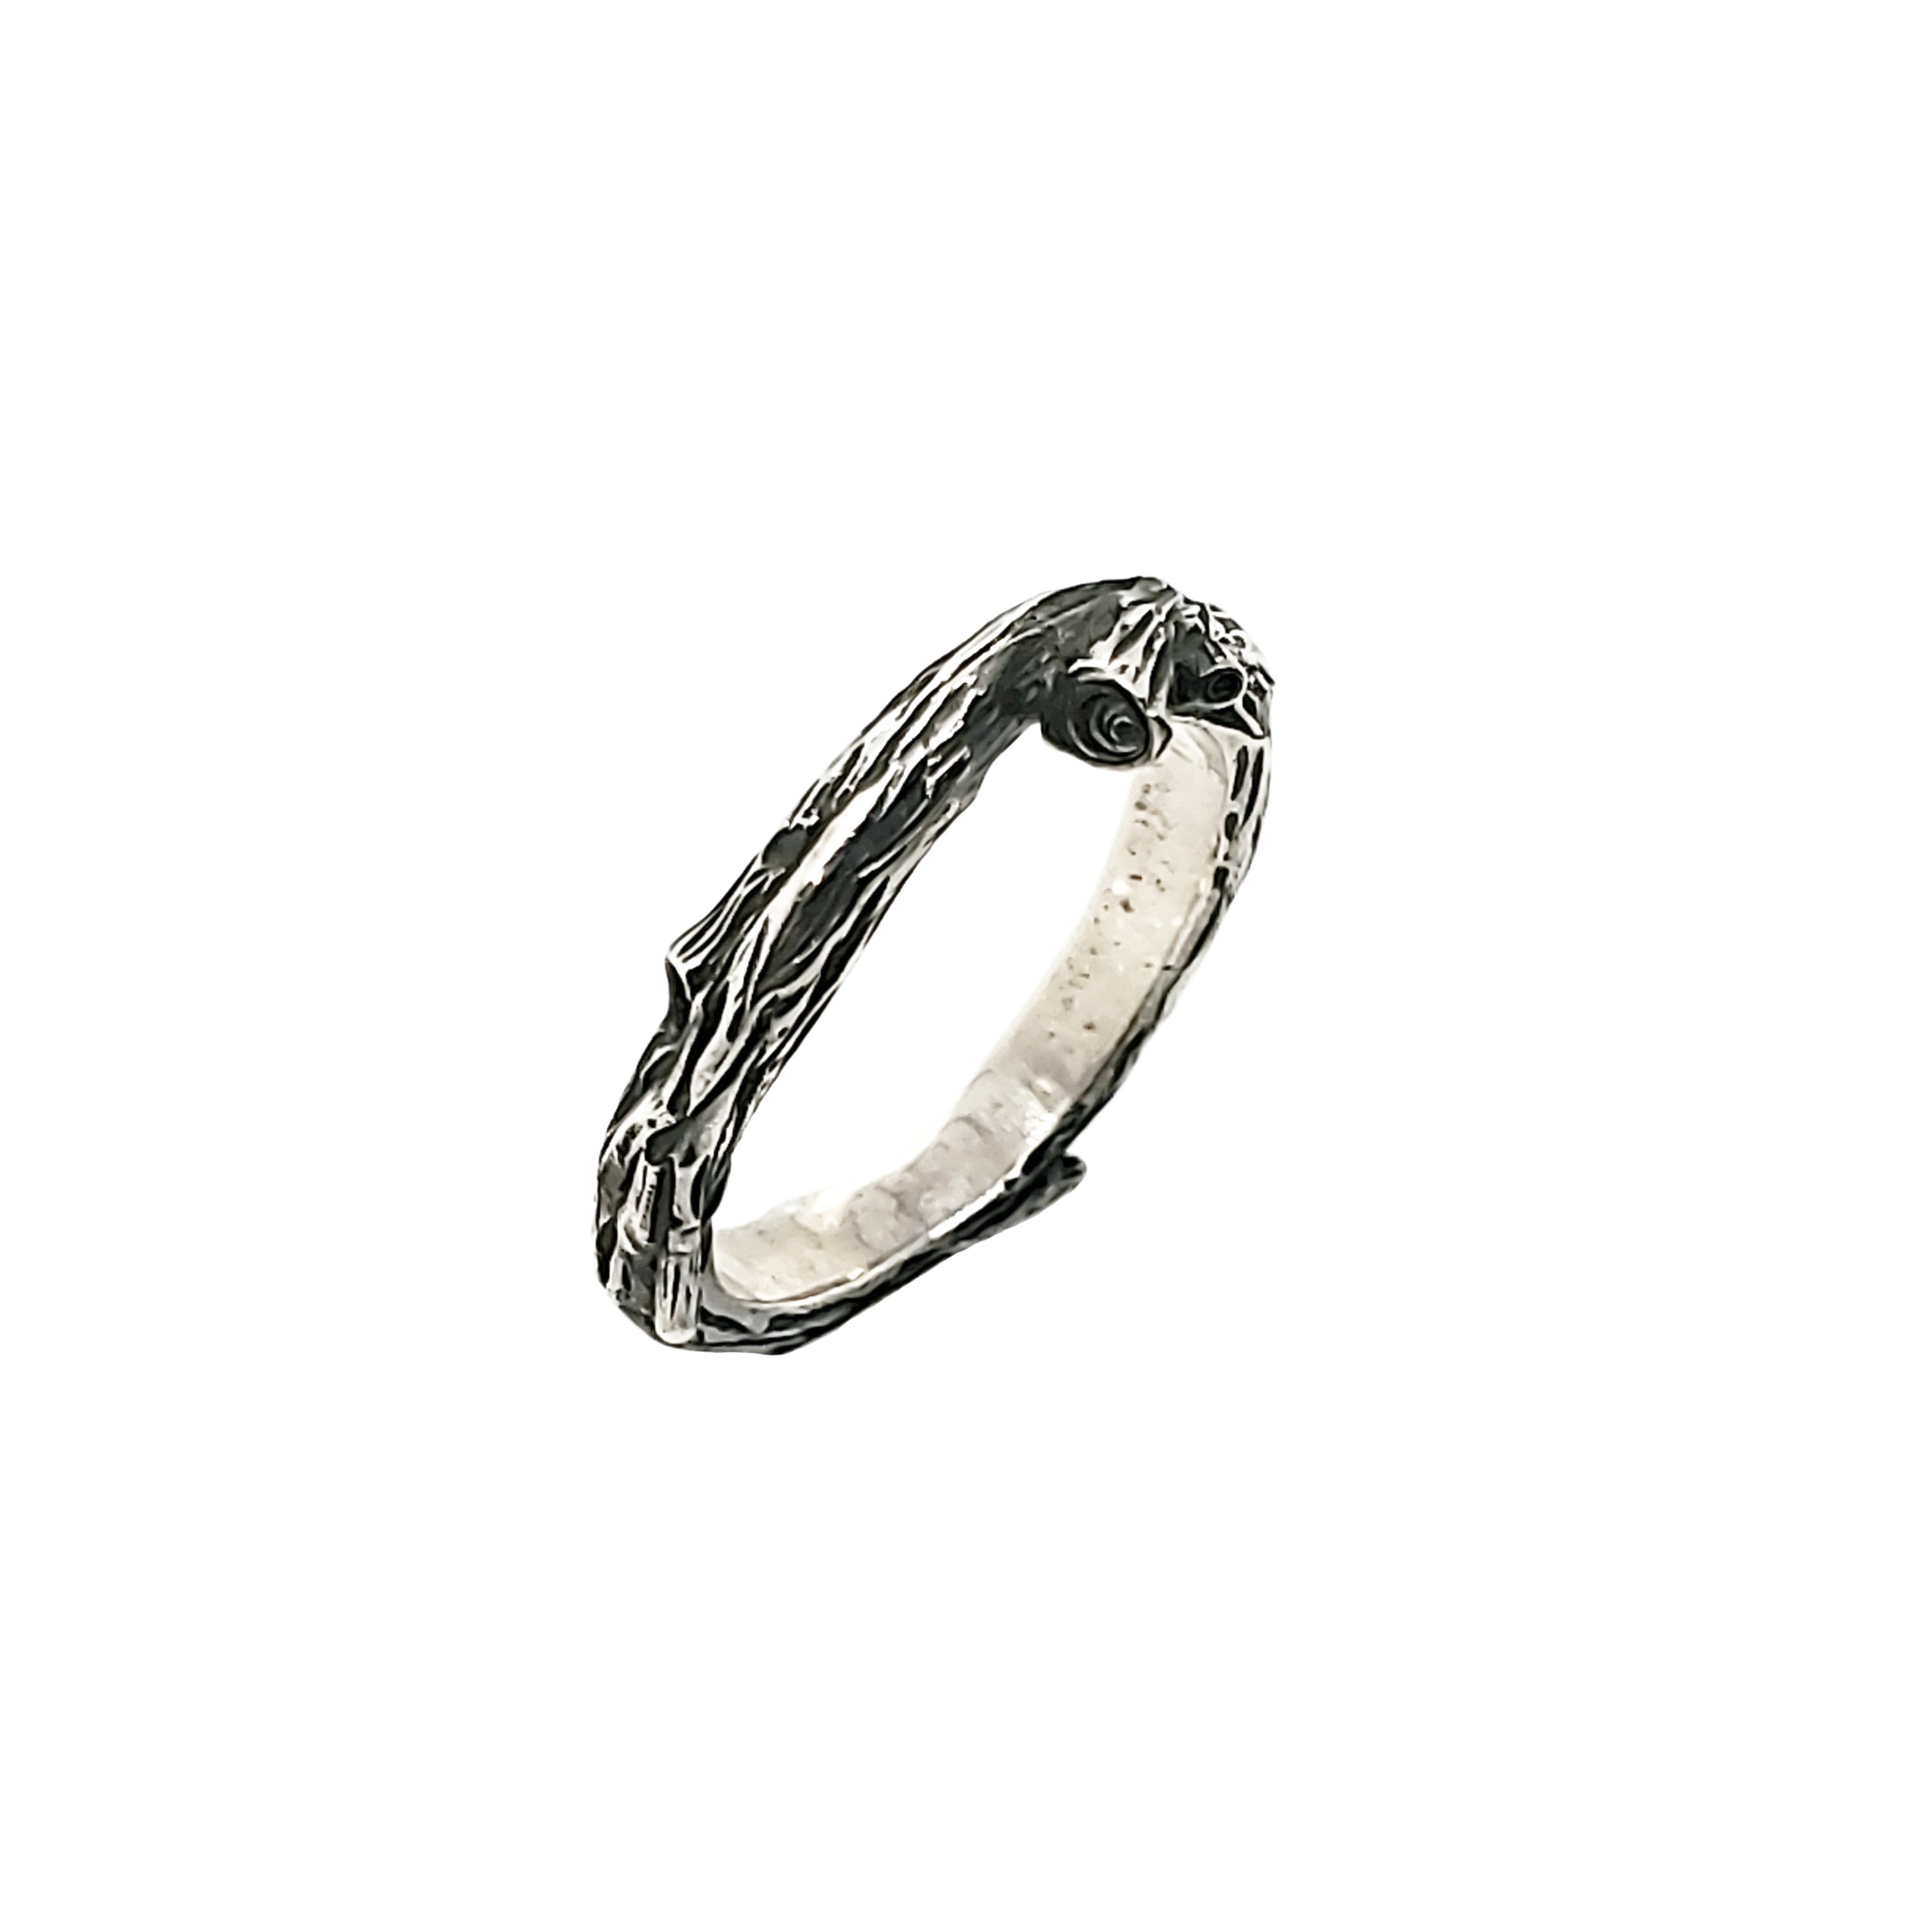 Custom Made Sterling Silver "Vine" Collection Ring